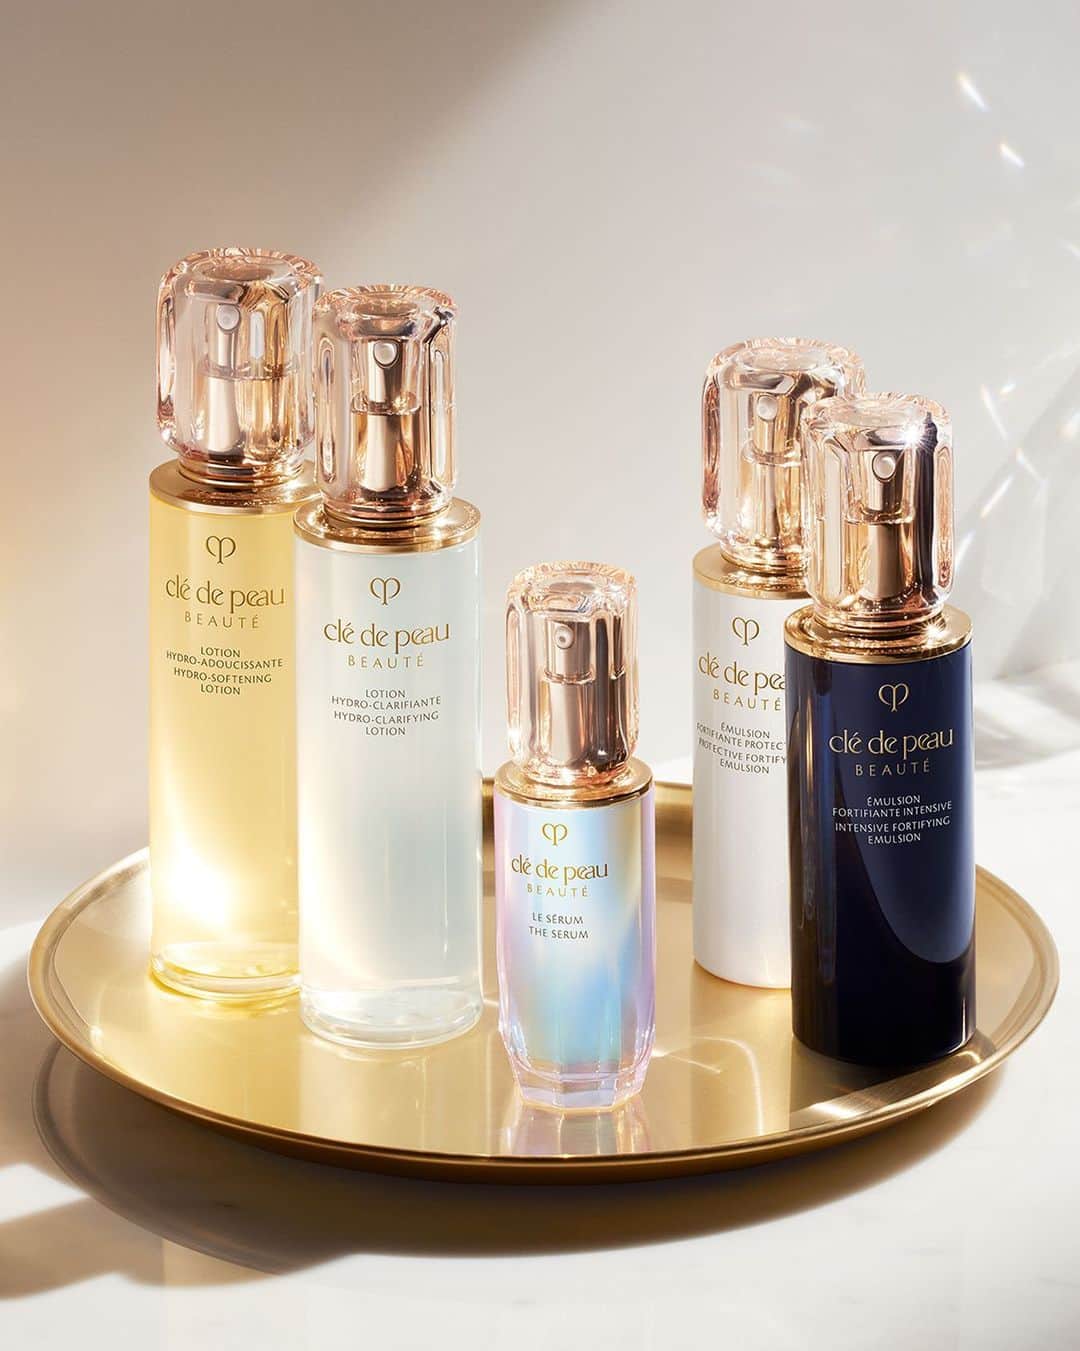 Clé de Peau Beauté Officialのインスタグラム：「Just as Rome wasn’t built in a day, beautiful skin isn’t achieved overnight. Consistency is vital in achieving long-term benefits. Thankfully, our 3-step #KeyRadianceCare routine makes pampering your skin so much easier.   Step 1: Start with #TheSerum, enriched with rare botanicals and potent antioxidants to awaken #SkinIntelligence.   Step 2: Apply #TheLotion, available in two formulas to meet different skin needs.   Step 3: Round off the routine with #ProtectiveFortifyingEmulsion (day) or the #IntensiveFortifyingEmulsion (night).   Remember, a skincare ritual is not a mundane routine; it's a commitment to your skin's wellbeing 🤍 Here’s to a radiant new you!    「ローマは一日にして成らず」と言われるように、美しい肌も一朝一夕には手に入りません。効果を感じ続けるためには、継続が不可欠です。 3 ステップの #キーラディアンスケア 習慣で、毎日のお手入れがとても簡単になります。  ステップ１：独自成分であるスキンイルミネイター*を配合したクレ・ド・ポ ボーテ #ルセラム （医薬部外品）で #肌の知性 **を目覚めさせましょう。 ステップ２：クレ・ド・ポー ボーテ #ローションイドロＡｎ （医薬部外品）またはクレ・ド・ポー ボーテ #ローションイドロＣｎ （医薬部外品）の化粧水で、肌を健やかに育みます。 ステップ 3：クレ・ド・ポー ボーテ #エマルションプロテクトゥリスｎ （医薬部外品）、またはクレ・ド・ポー ボーテ #クレームアンタンシヴｎ （医薬部外品）でお手入れを締めくくります。  毎日のスキンケアは単なる習慣ではなく、肌へご褒美を与える特別な時間です。輝き続ける肌を目指しましょう！  *スキンイルミネイター（保湿・整肌）配合（加水分解シルク、加水分解コンキオリン、テアニン、トウキエキス、シソエキス、グリシン、グリセリン、PEG/PPG- 17/4 ジメチルエーテル、トレハロース） **「肌の知性」とは、すべての人が生まれながらにそなえている、生涯美しい輝きを保ち続けるための鍵です」